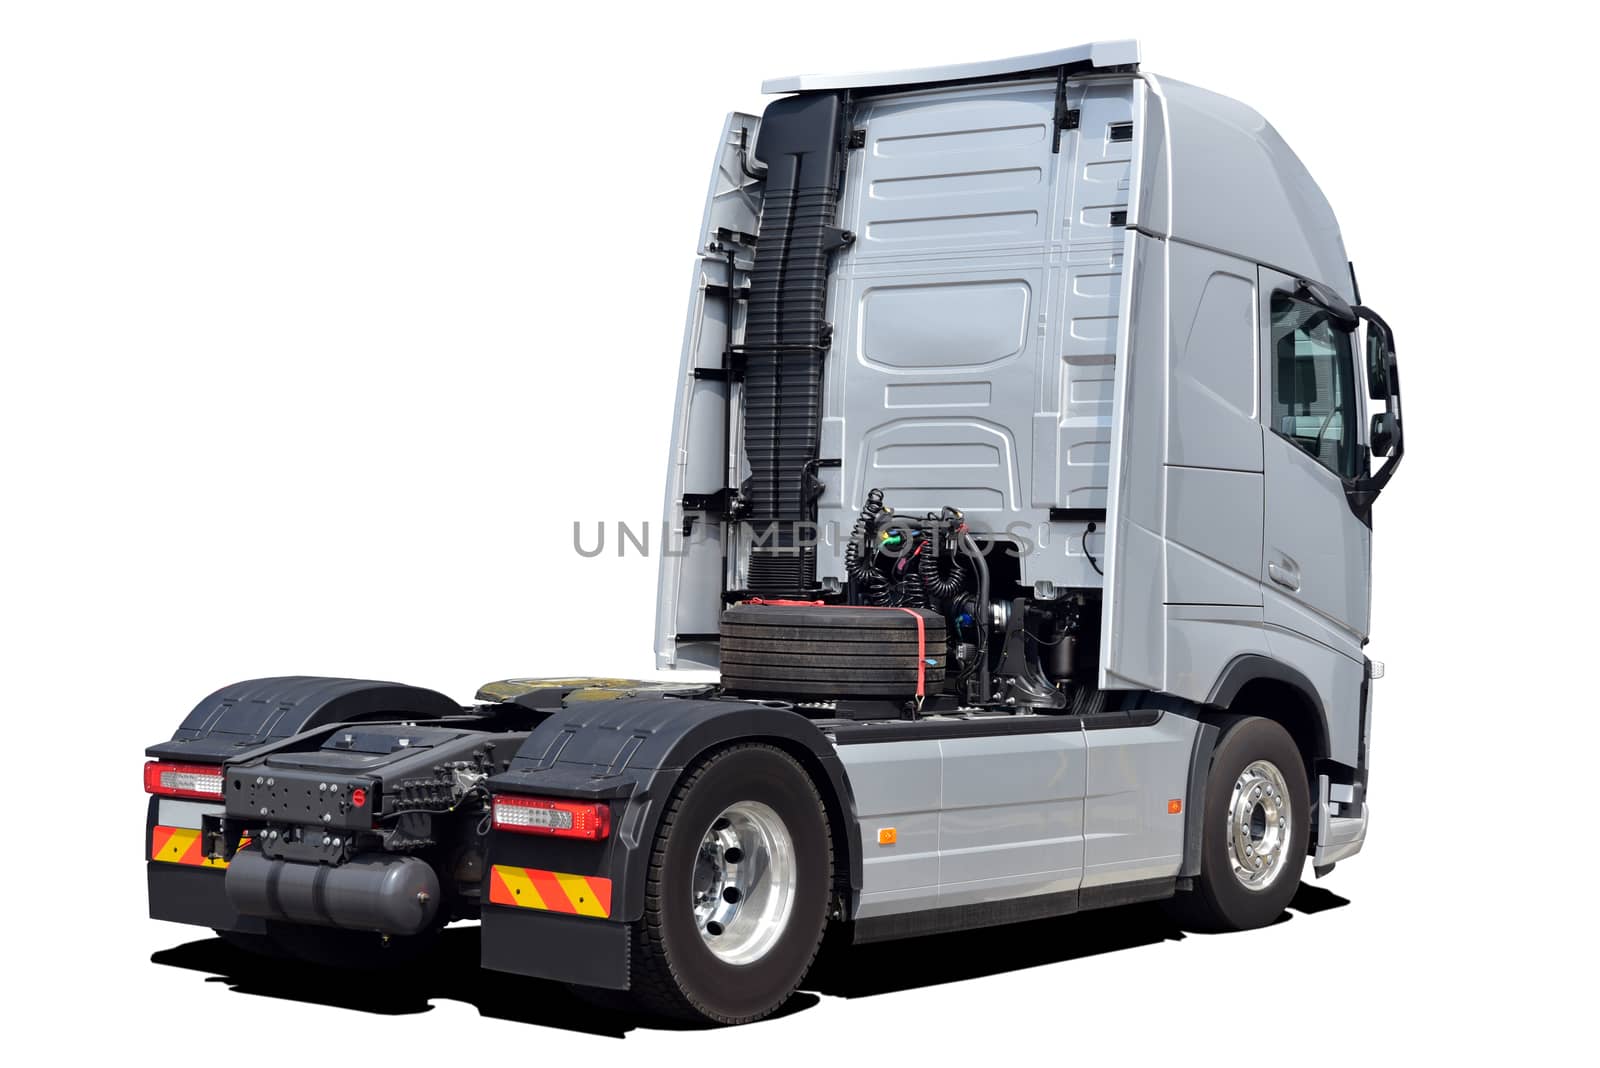 Large modern truck on a white background